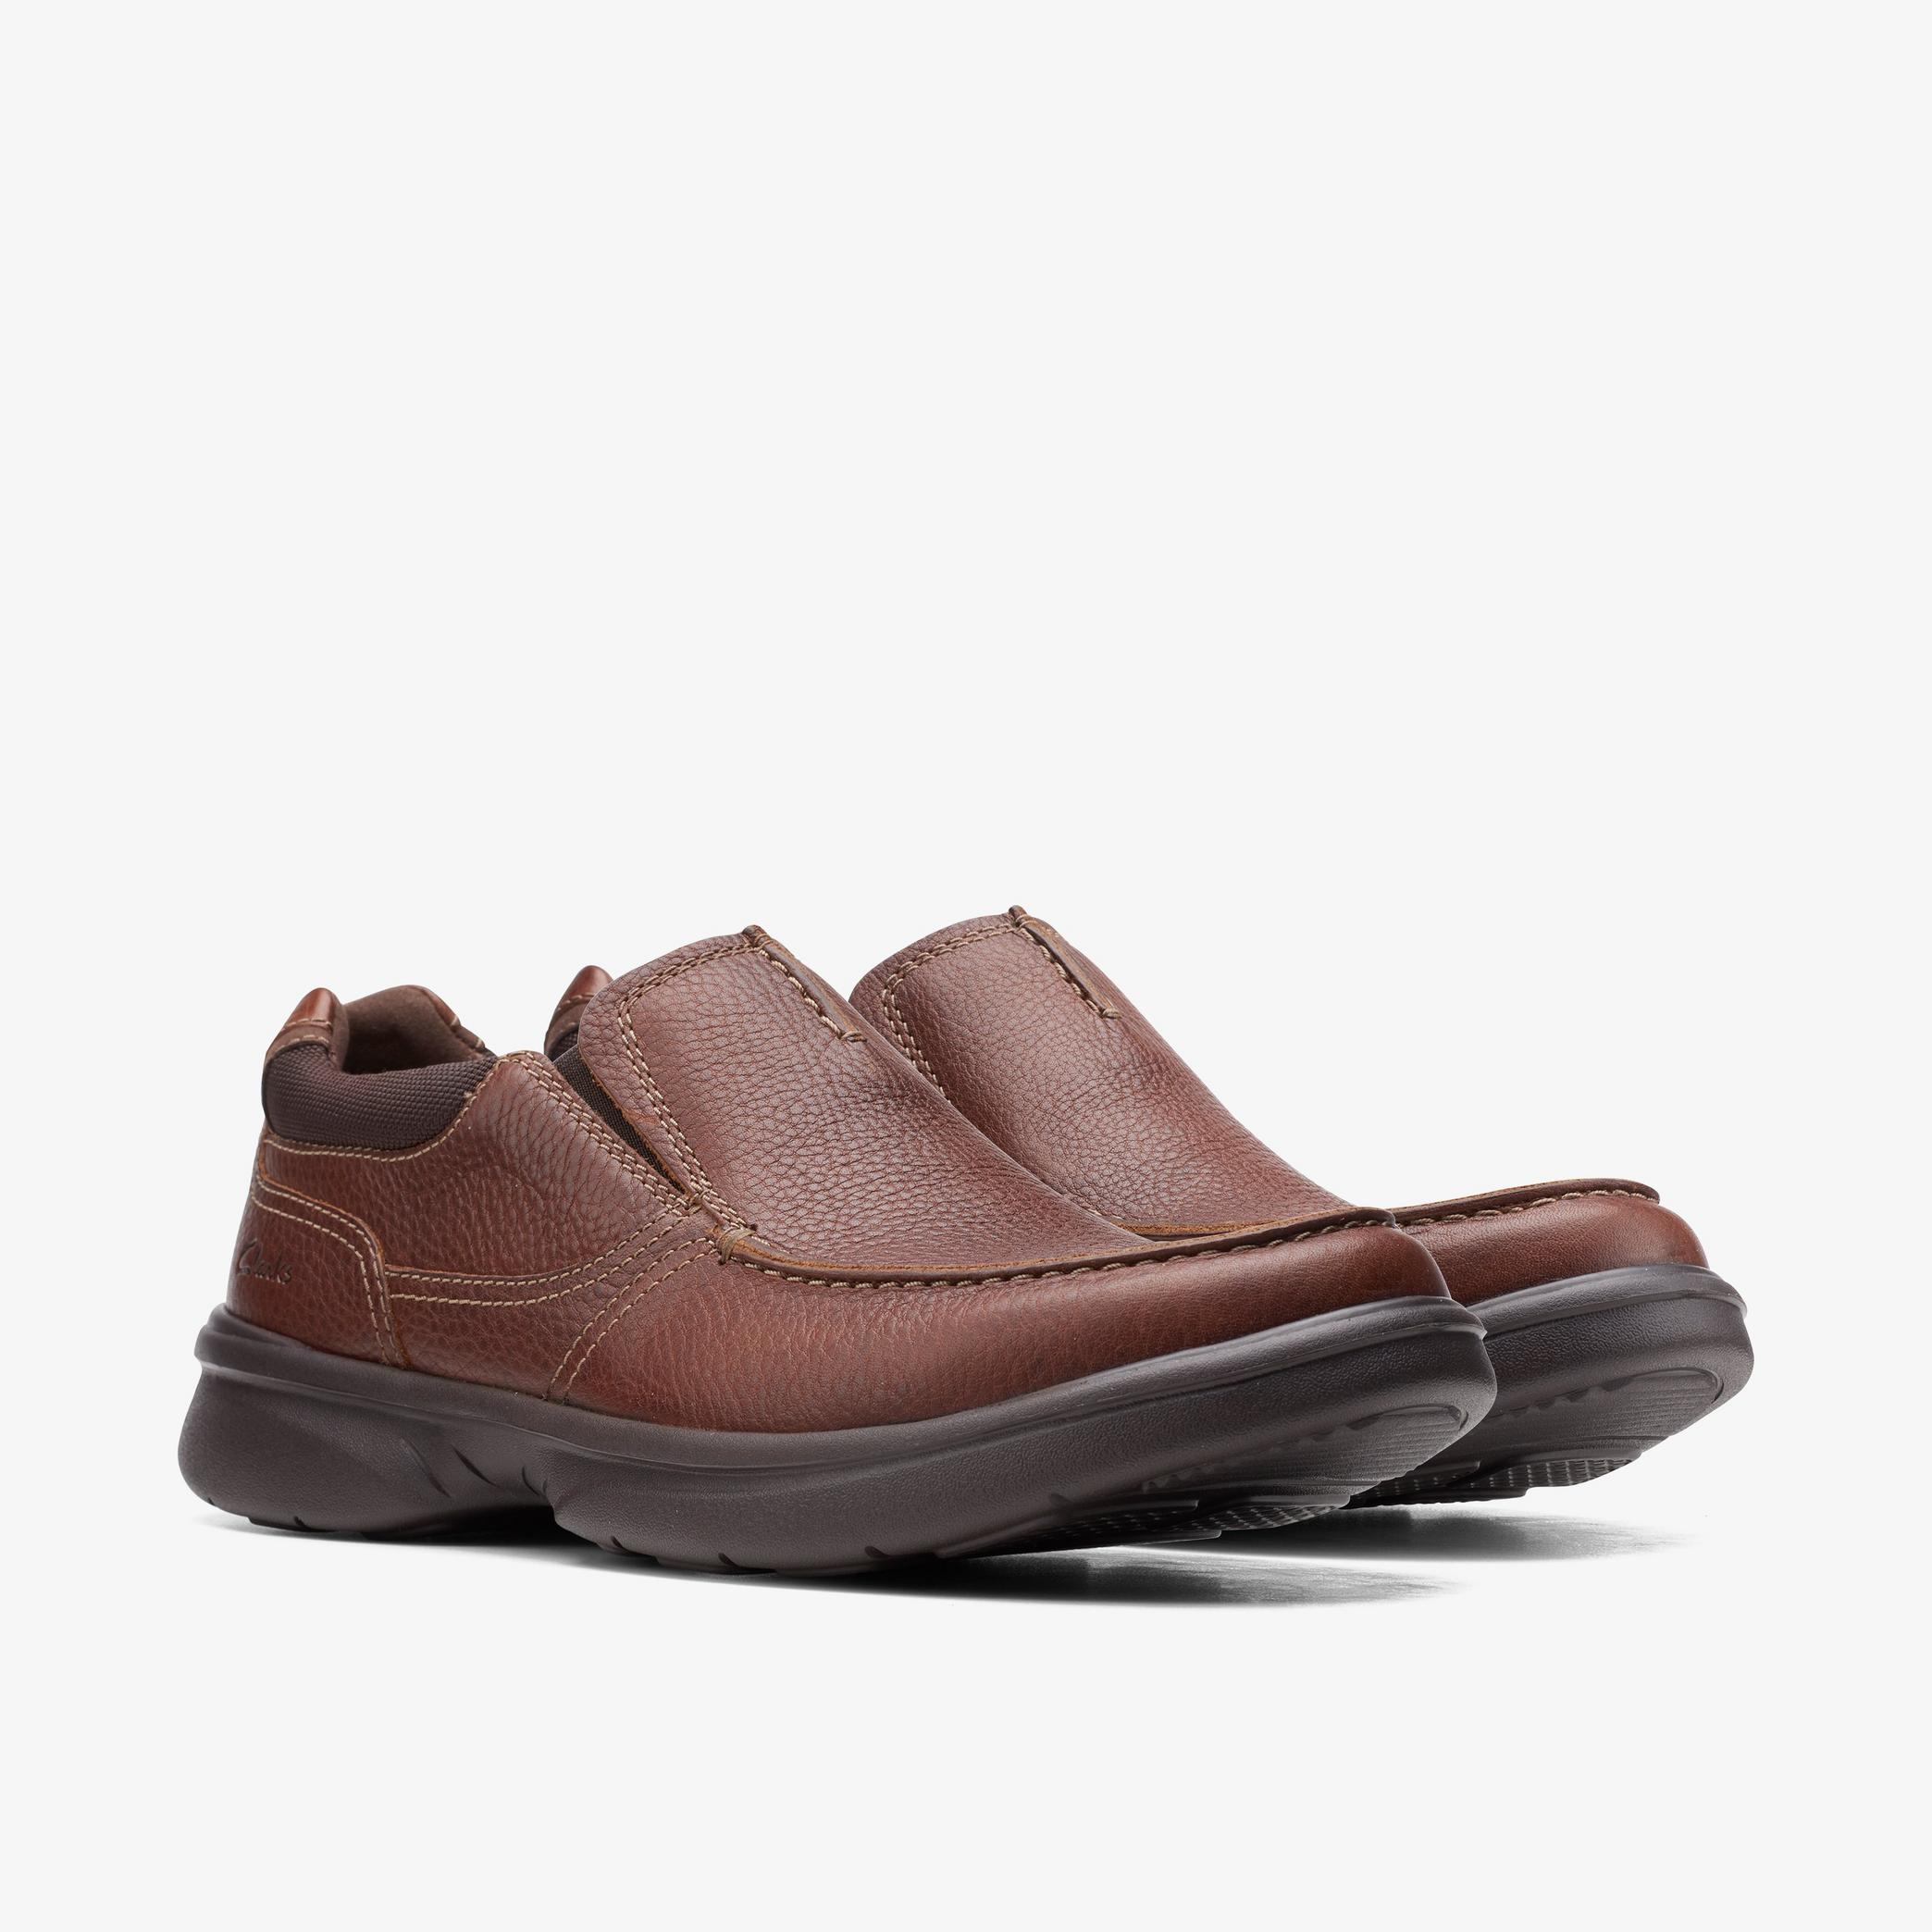 Mens Bradley Free Tan Tumbled Loafer Shoes